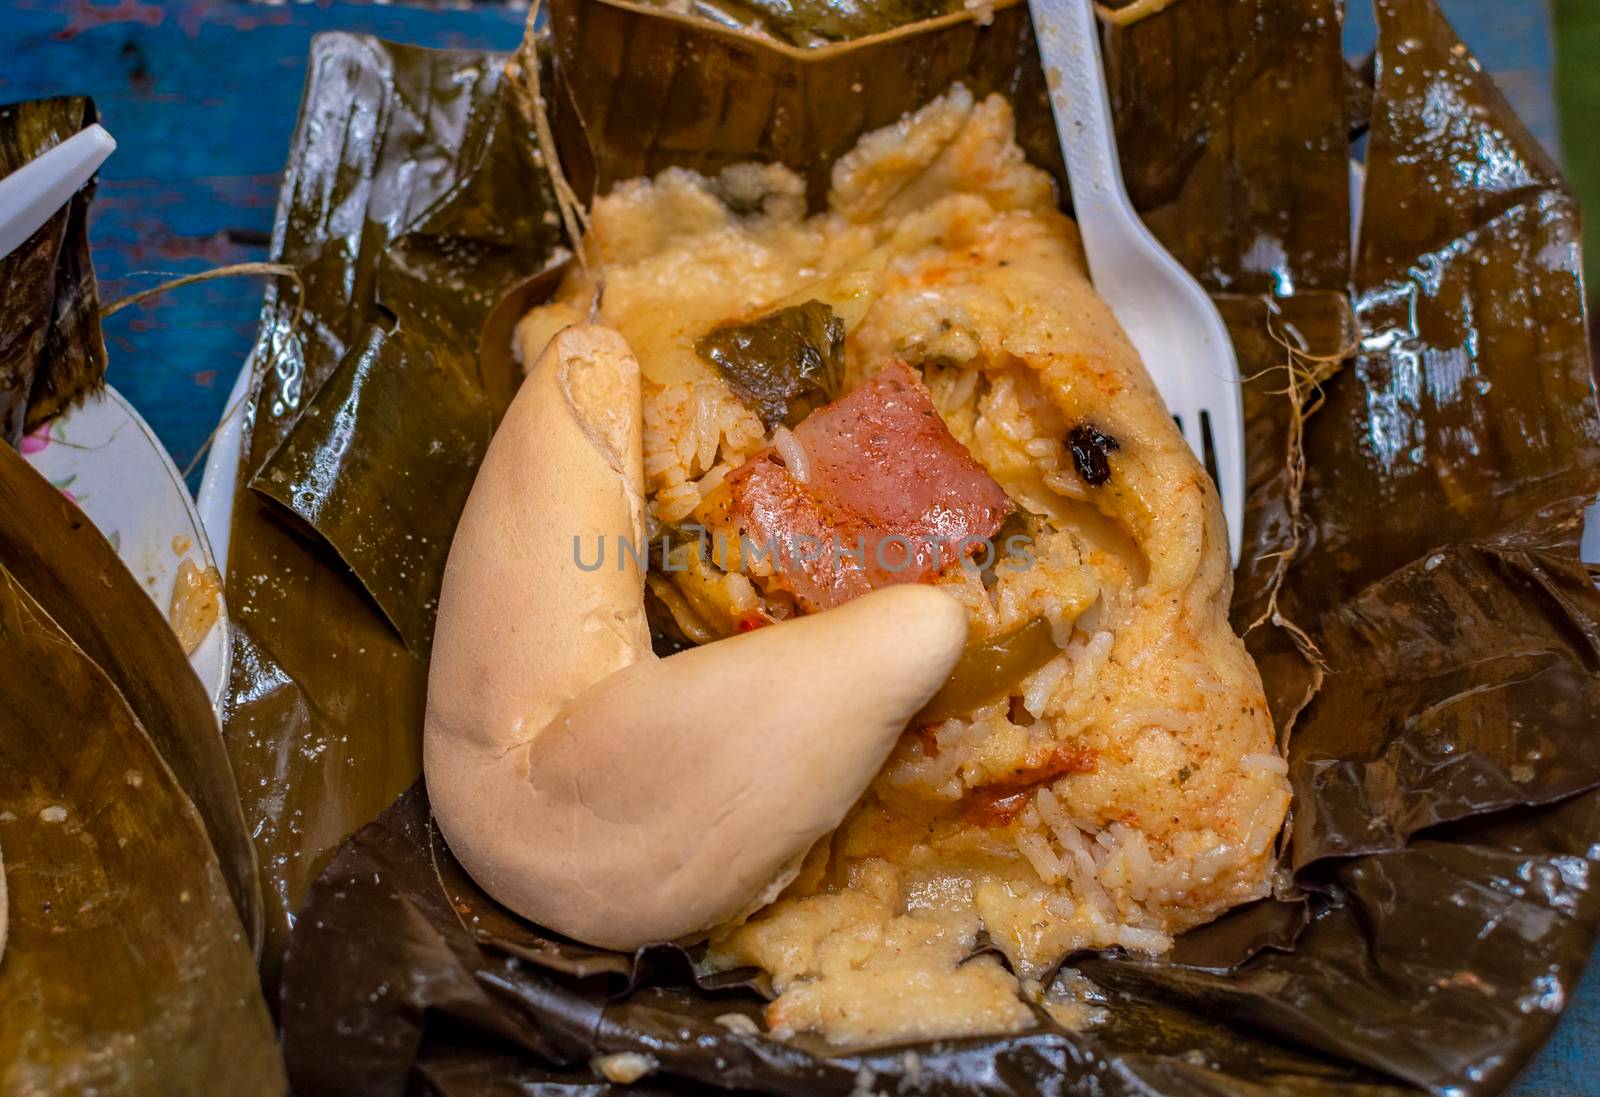 Nacatamal served with bread in a banana leaf on the table. Traditional Nacatamal served in banana leaf, Nicaraguan Nacatamal with bread on the table, Traditional Venezuelan Hallaca served